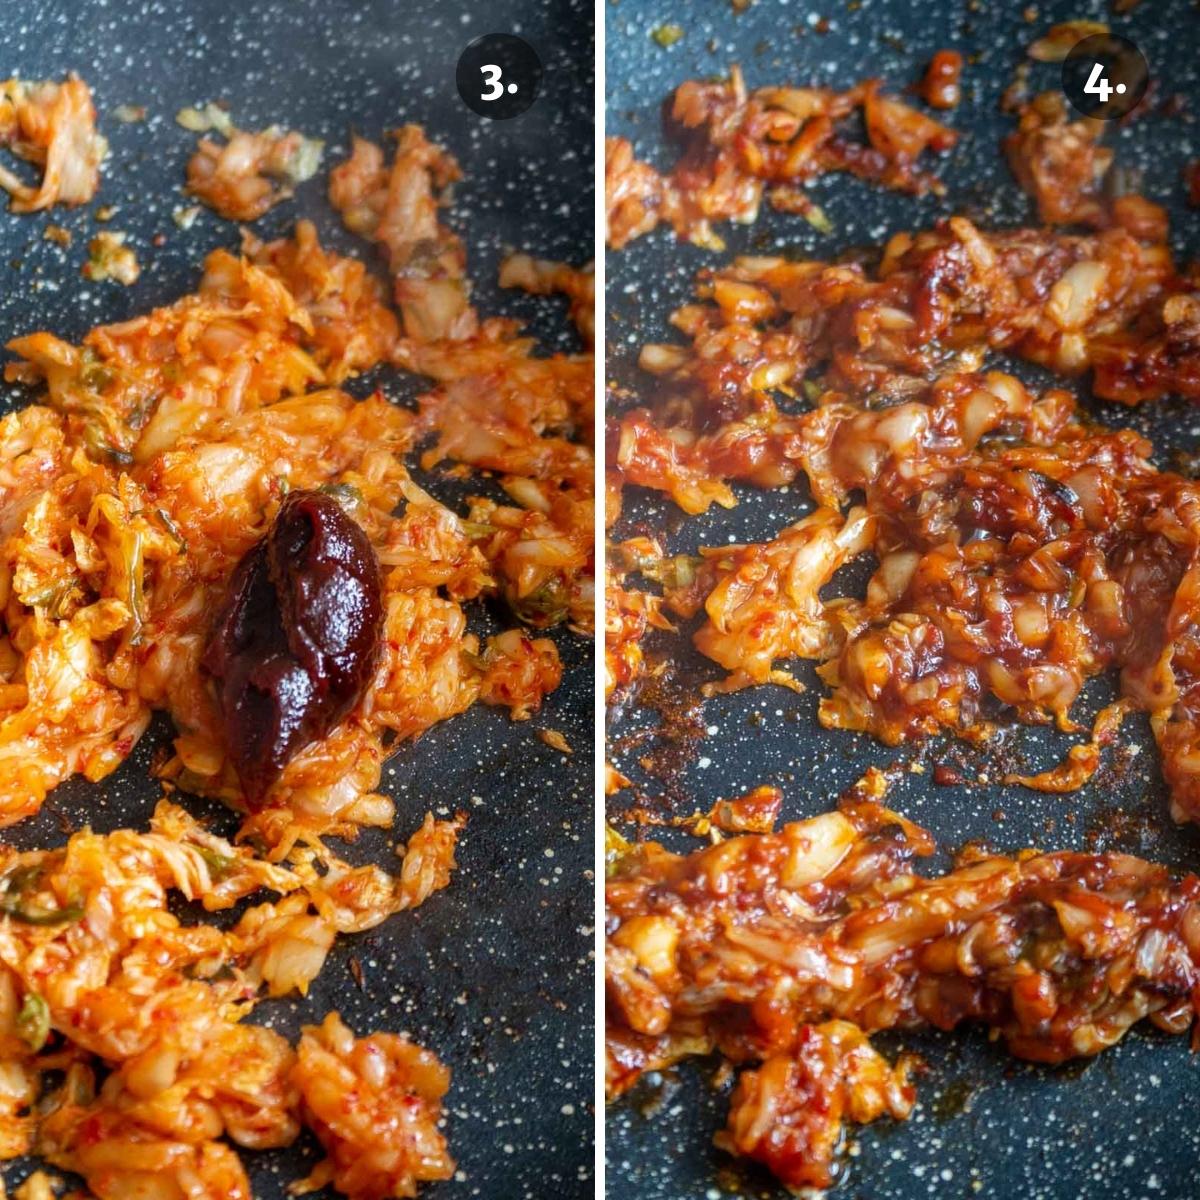 Dollop of gochujang in wok with kimchi and on the right after a couple minutes to cook.